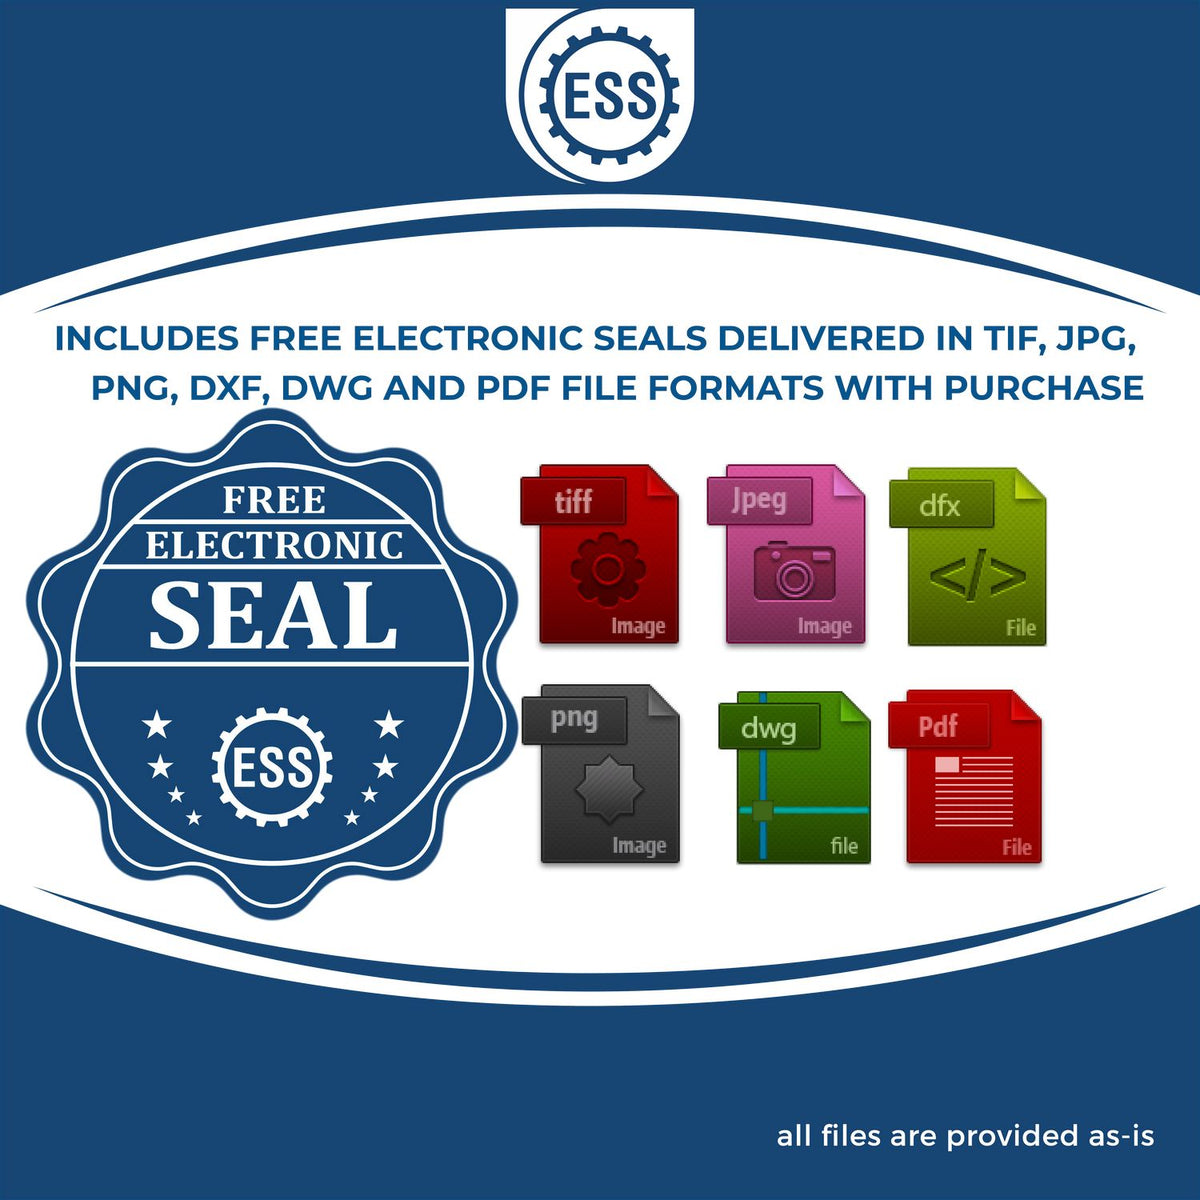 An infographic for the free electronic seal for the MaxLight Premium Pre-Inked Massachusetts State Seal Notarial Stamp illustrating the different file type icons such as DXF, DWG, TIF, JPG and PNG.